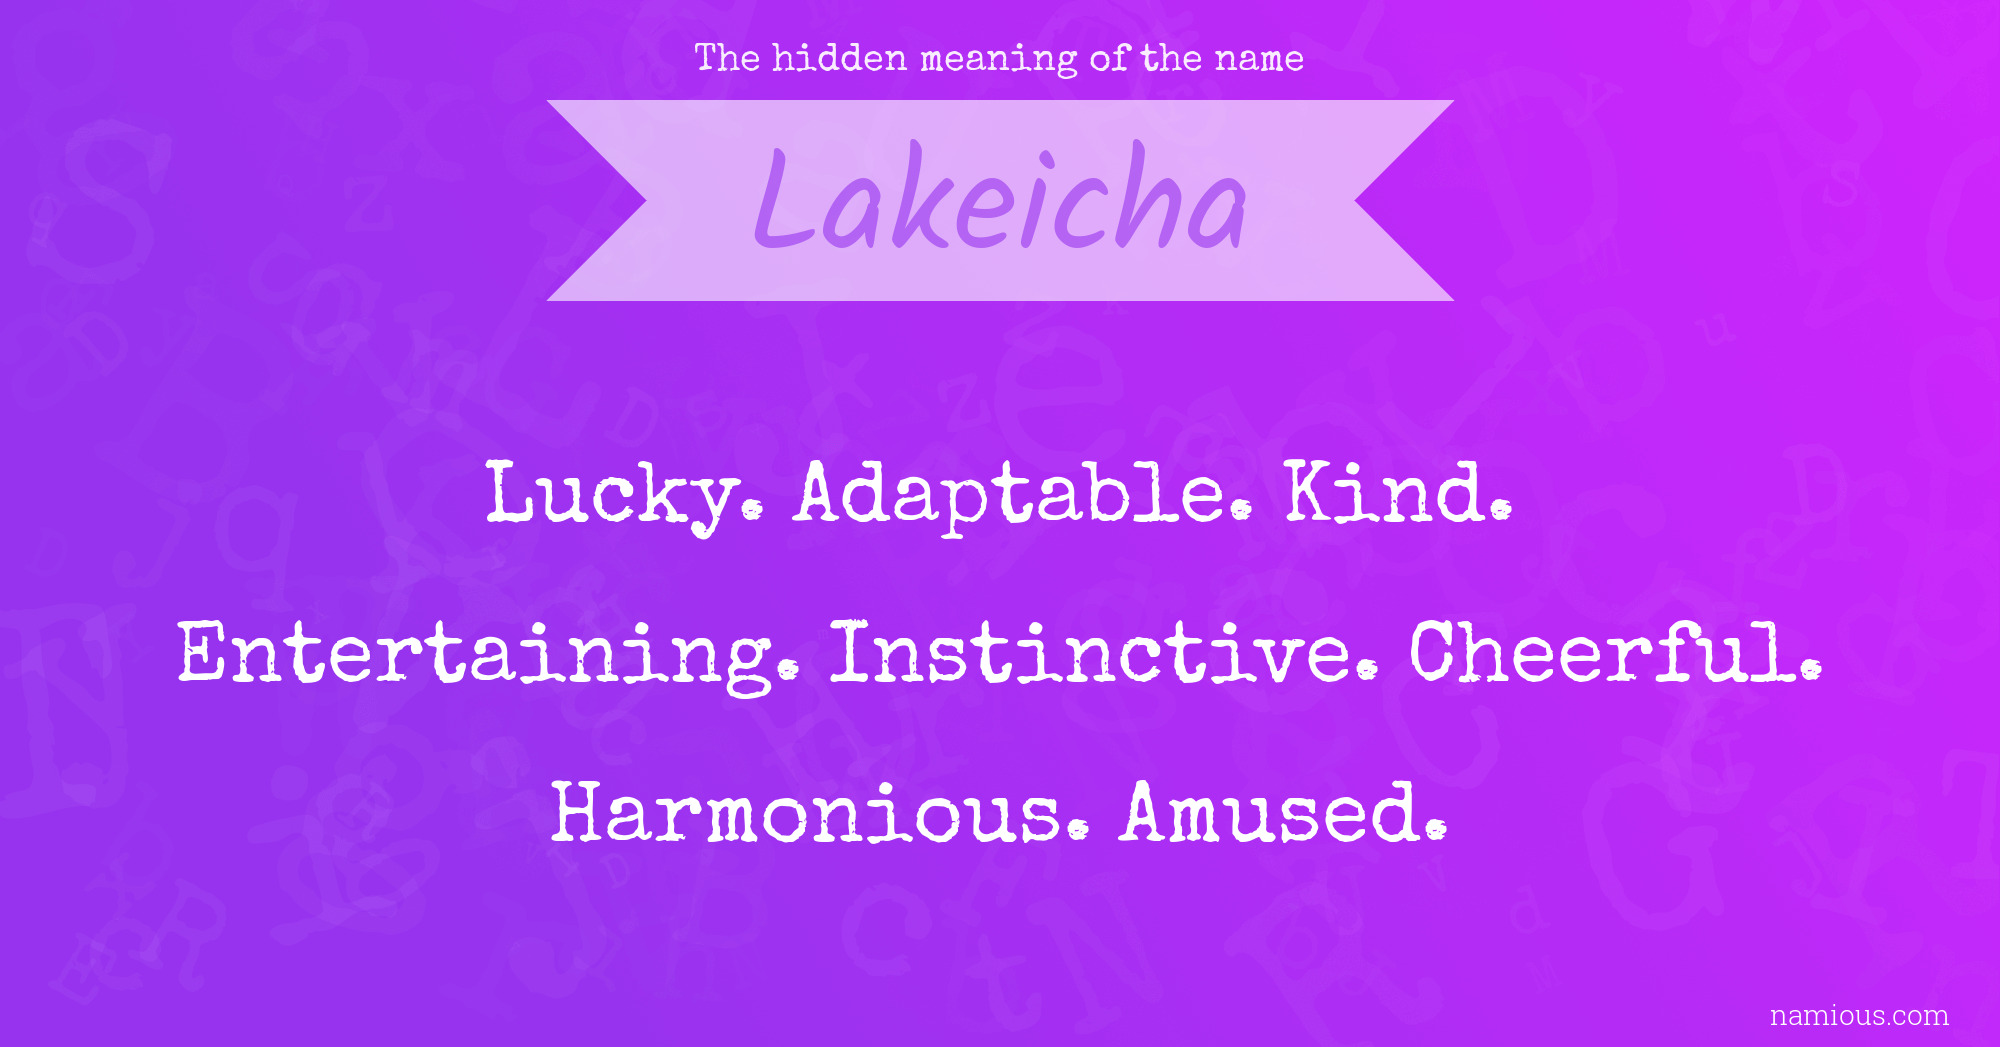 The hidden meaning of the name Lakeicha